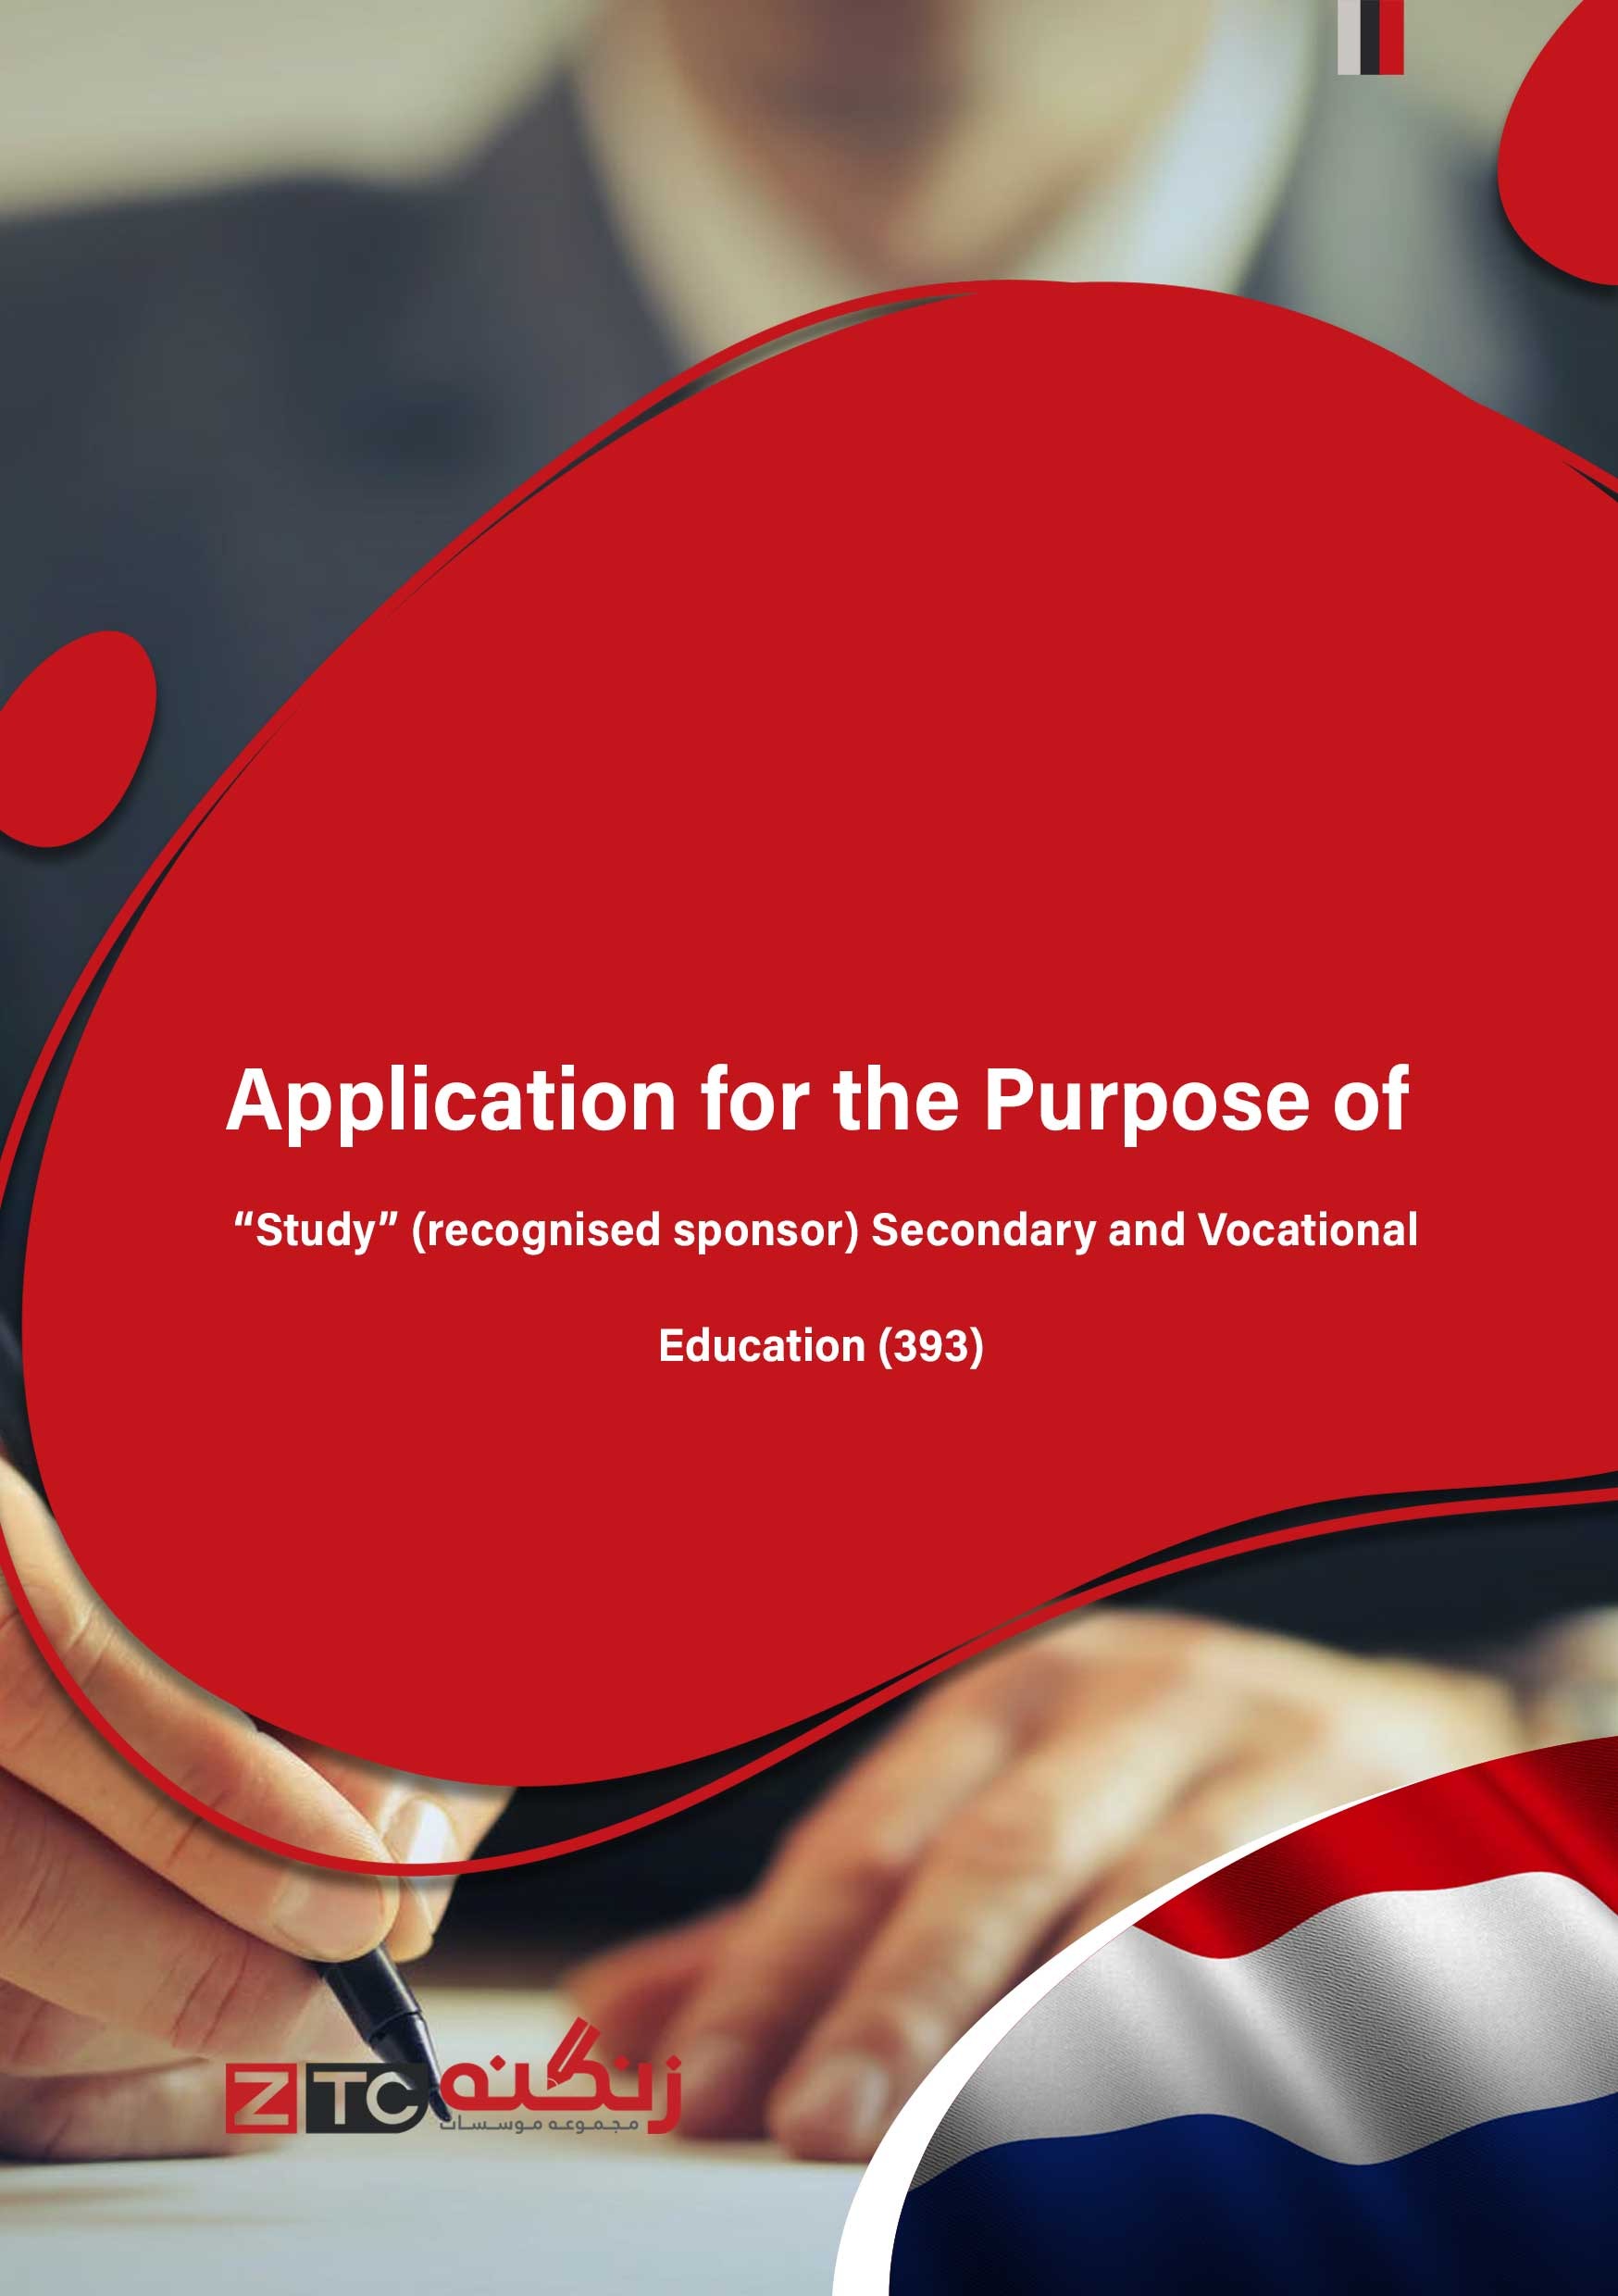 Application for the Purpose of “Study” (recognised sponsor) Secondary and Vocational Education (393)